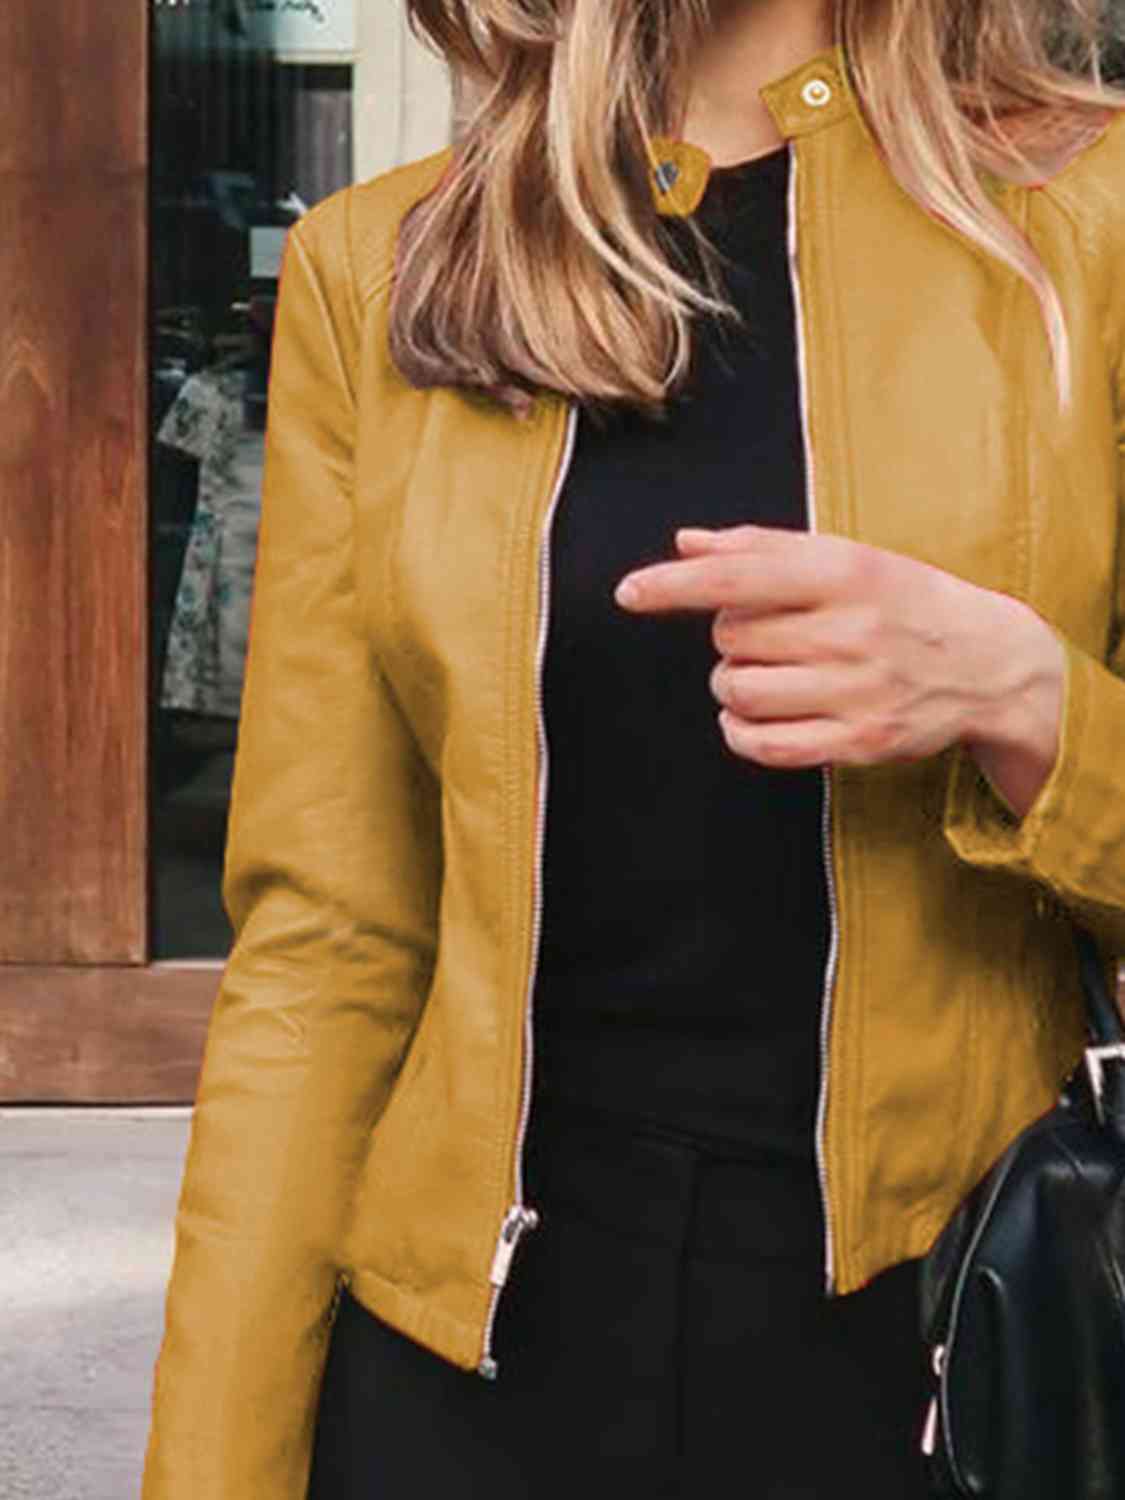 Faux Leather Zip-Up Jacket with Mock Neck